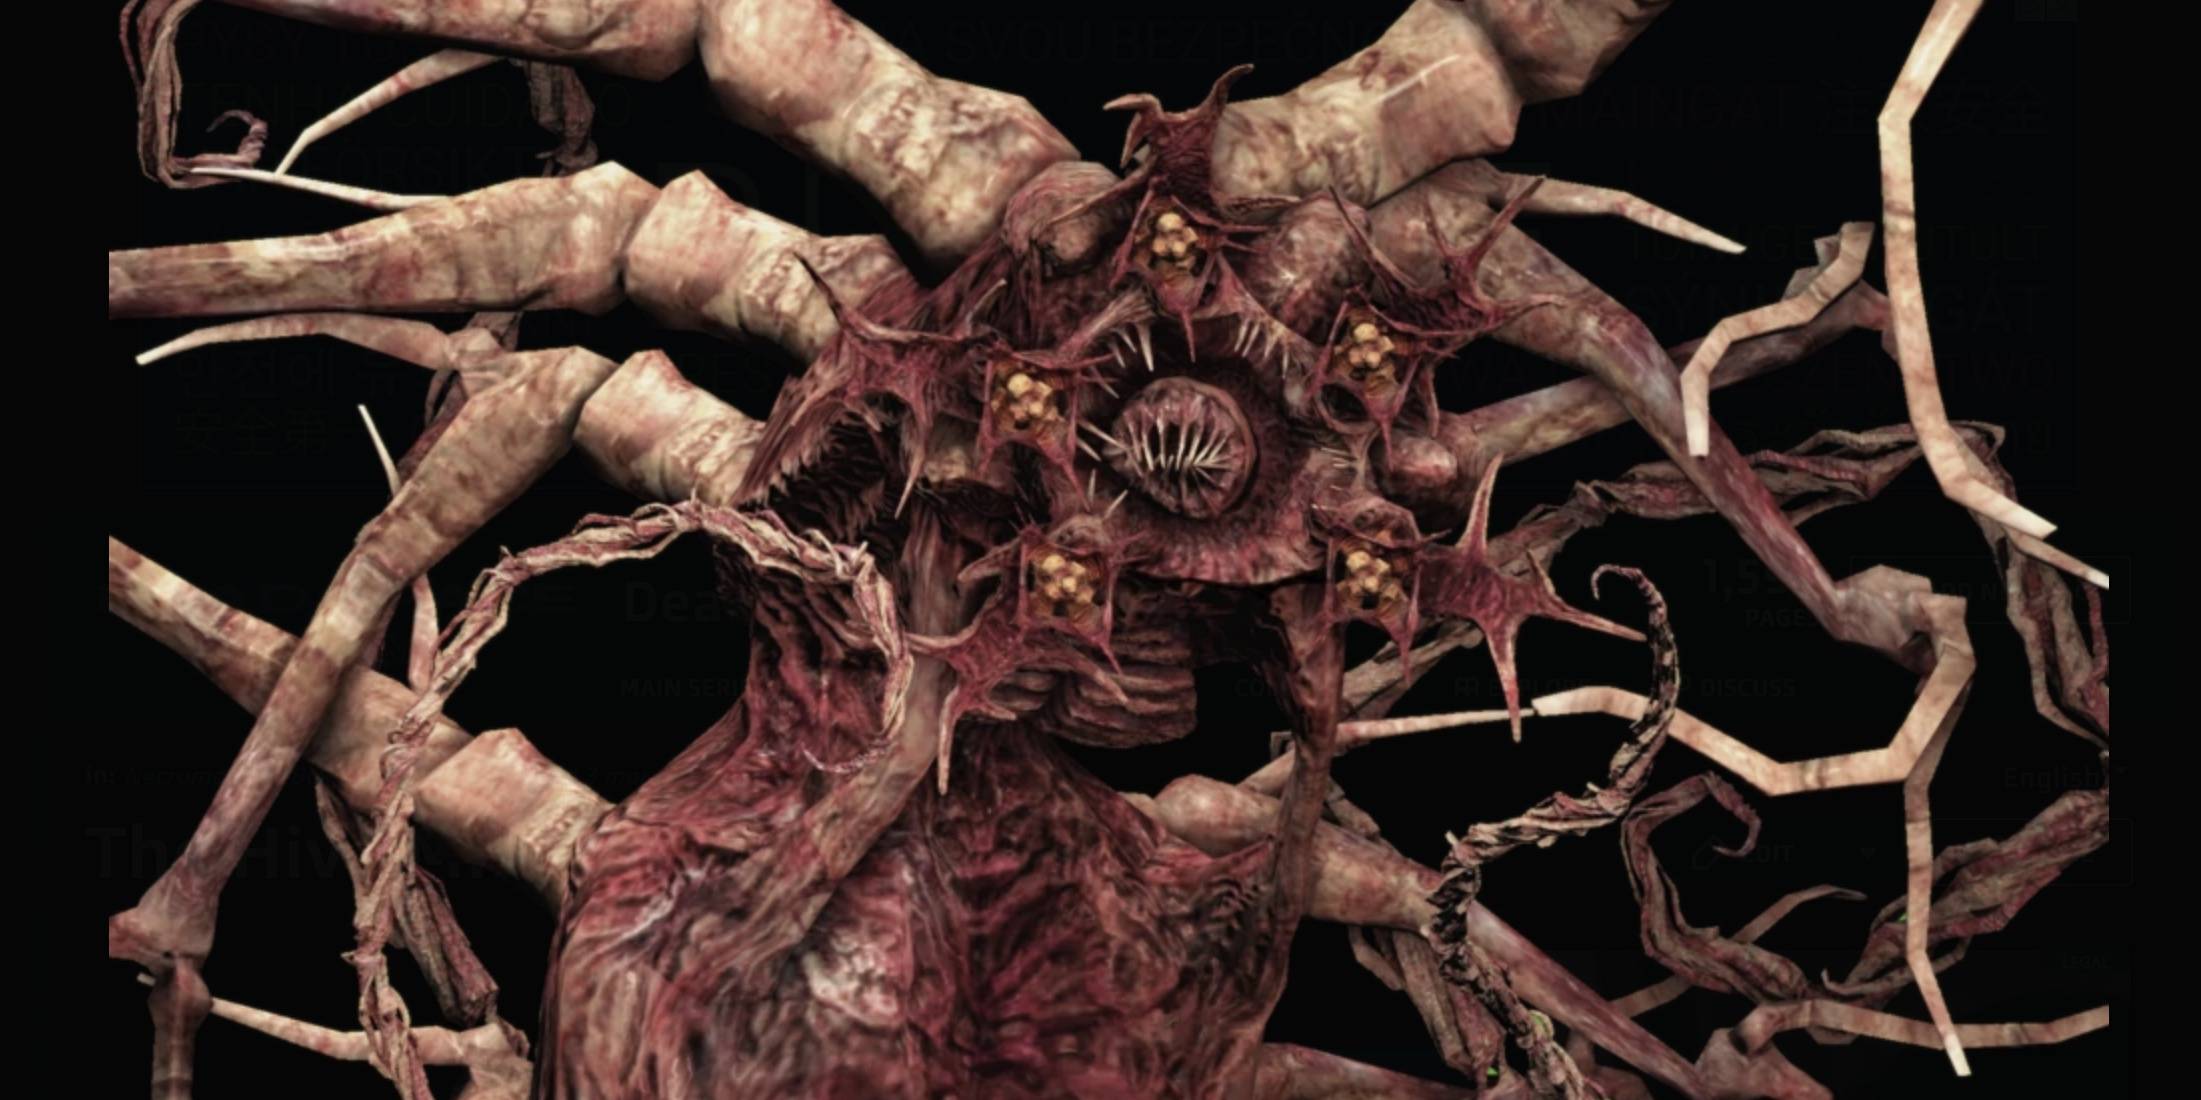 Every Monster In Dead Space Ranked From Least To Most Scary